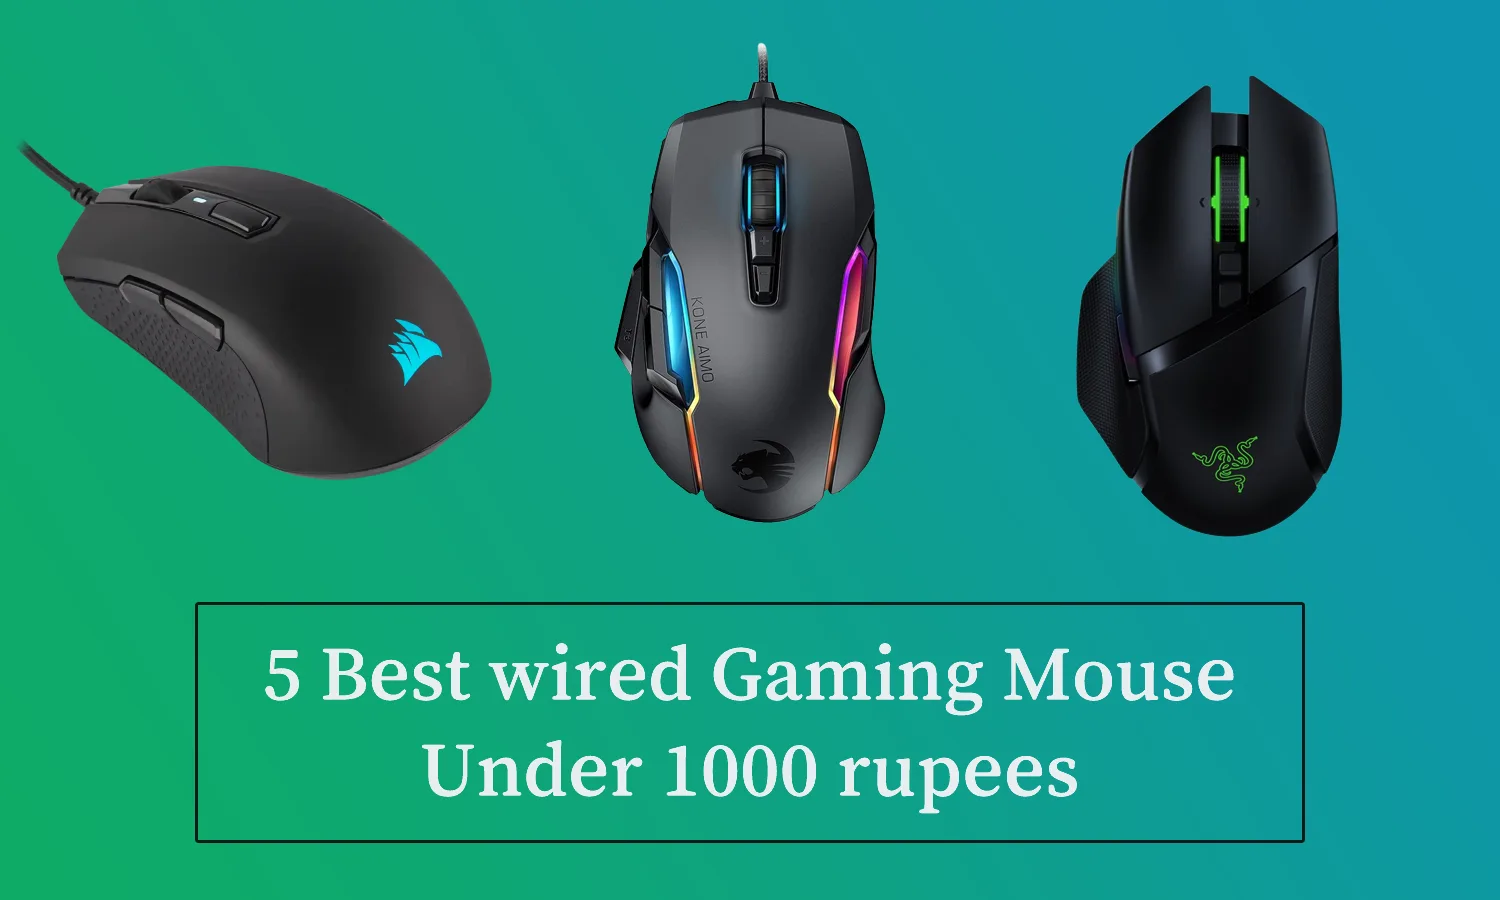 5 Best wired Gaming Mouse Under 1000 rupees